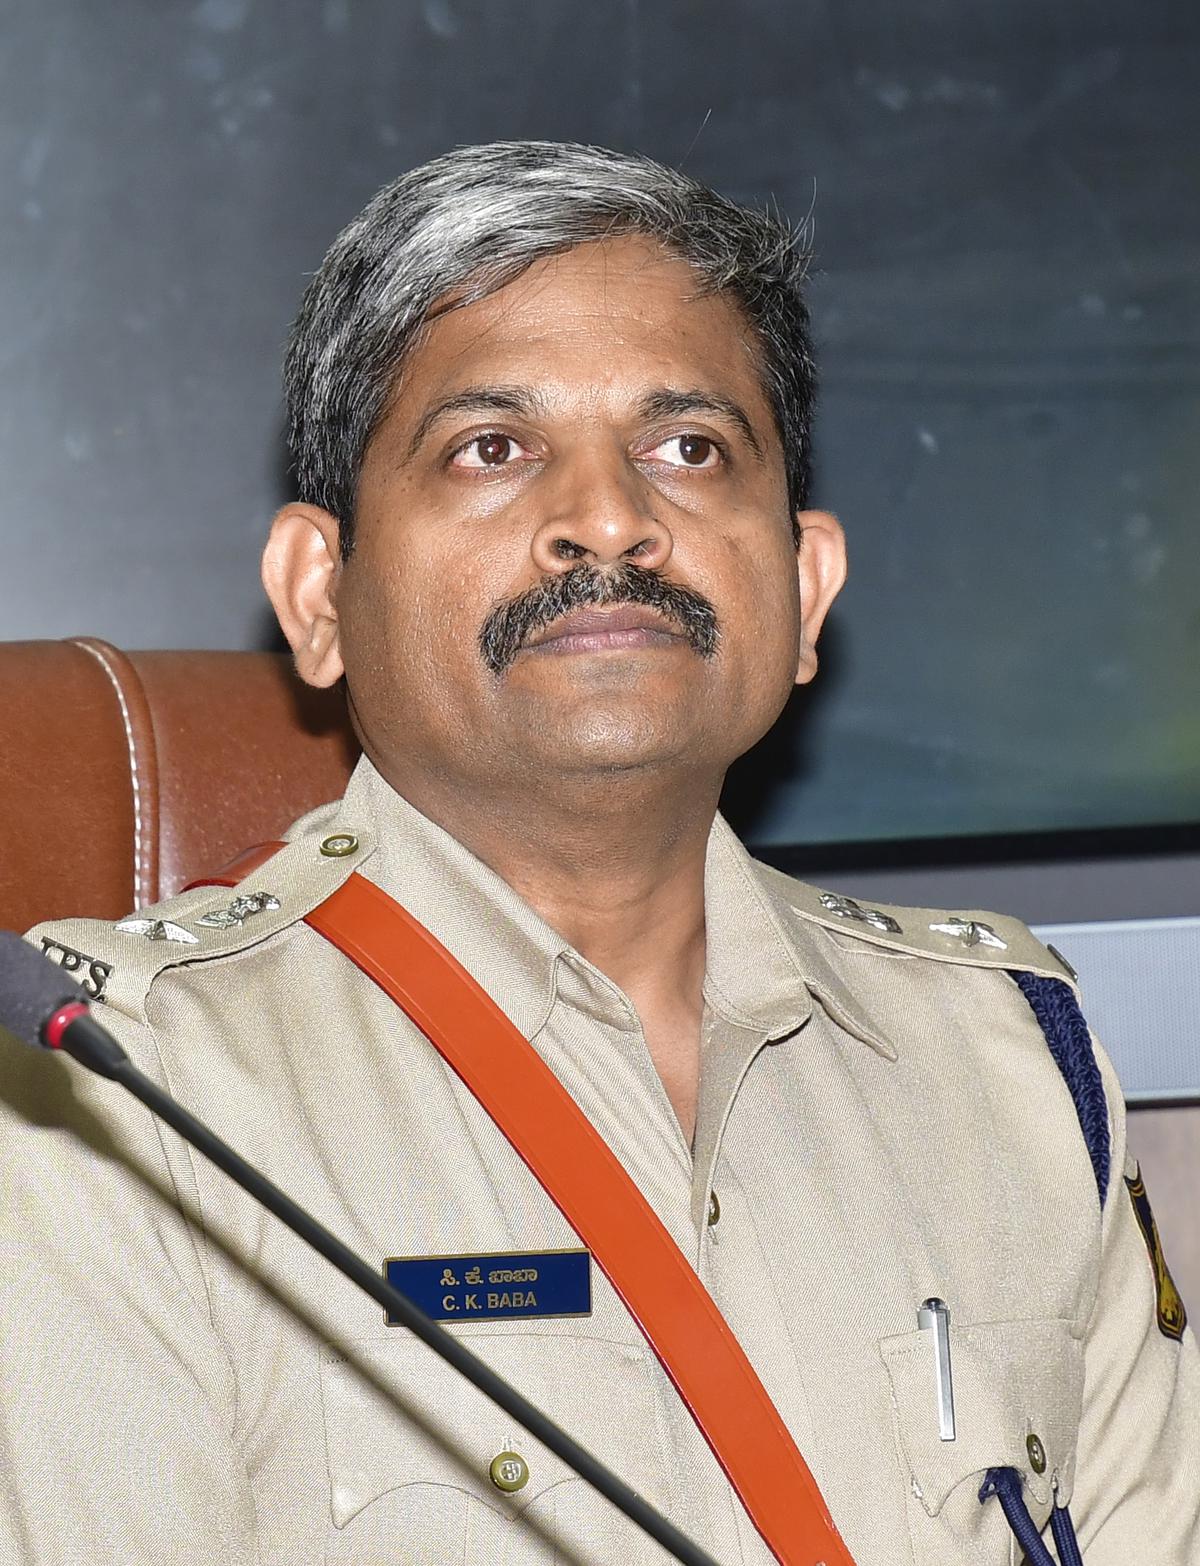 CK Baba, Deputy Commissioner of Police, South East Division, Bengaluru. 